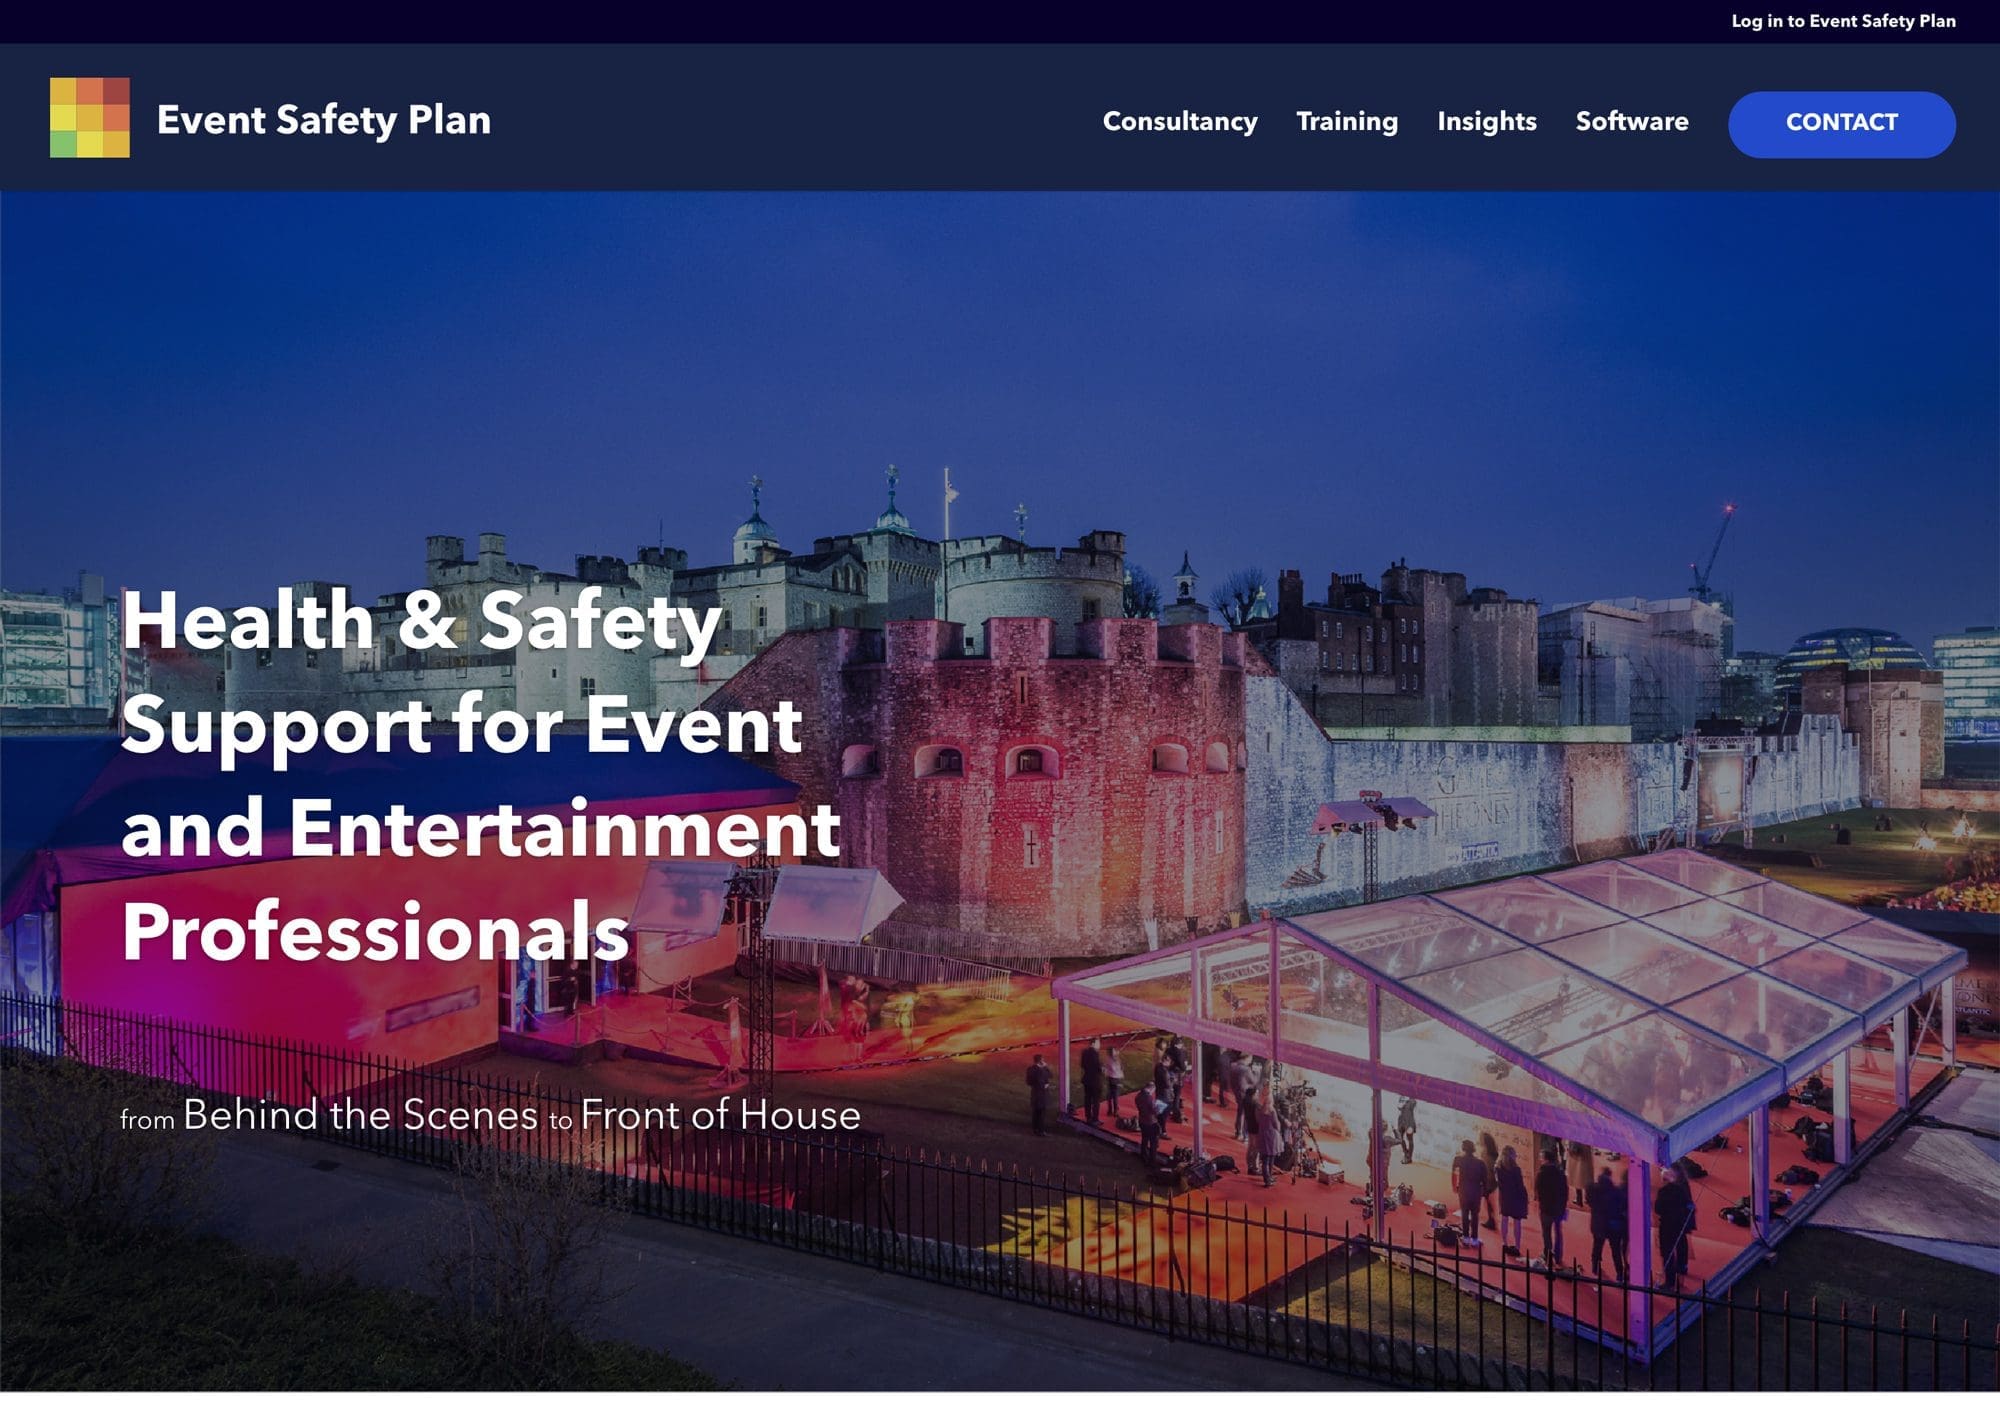 Event Safety Plan - Event Health & Safety Consultancy, Training and Safety - eventsafetyplan.com